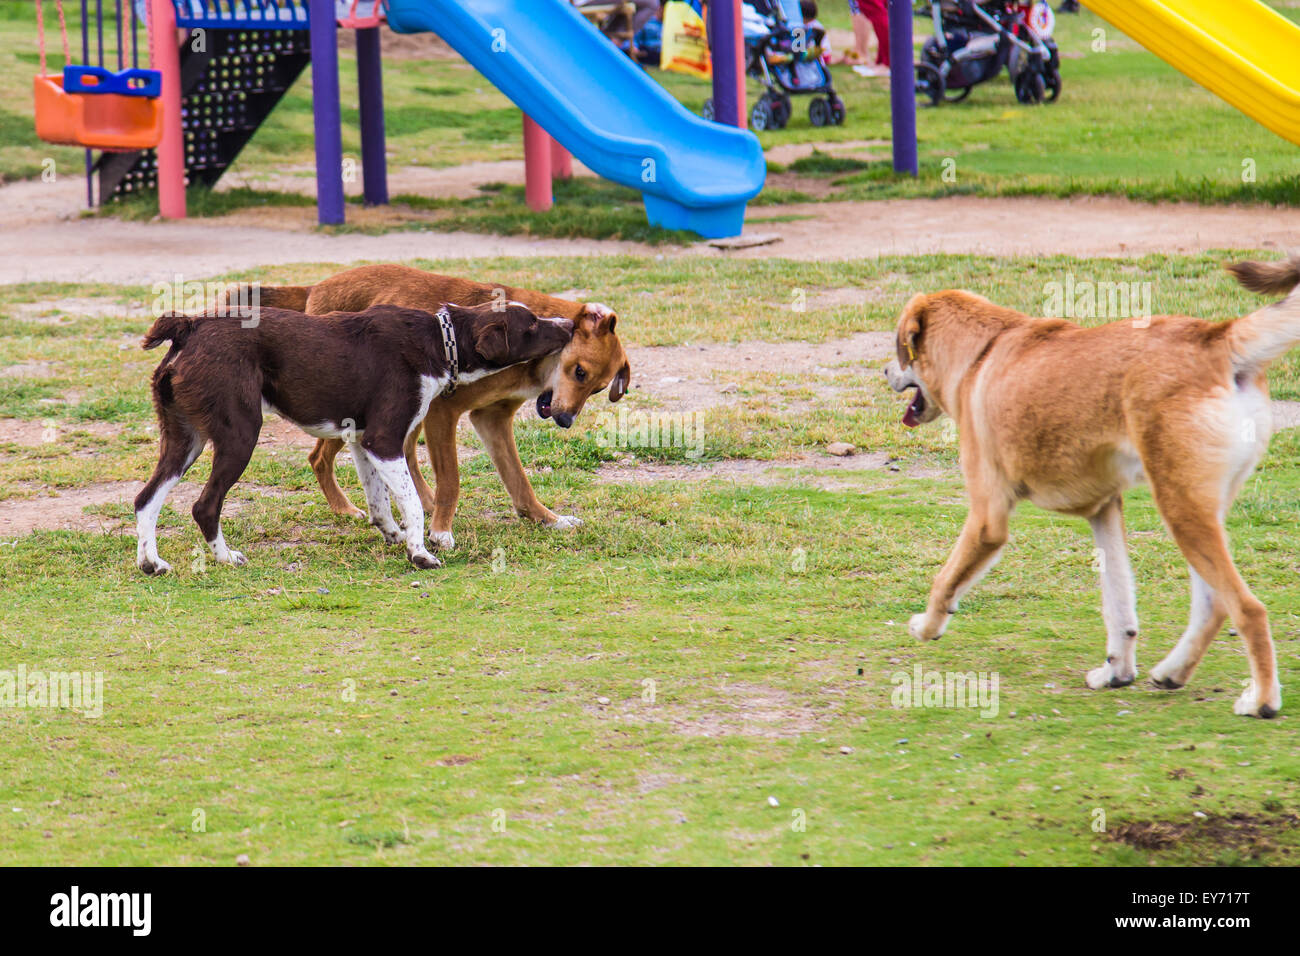 three dogs playing together Stock Photo